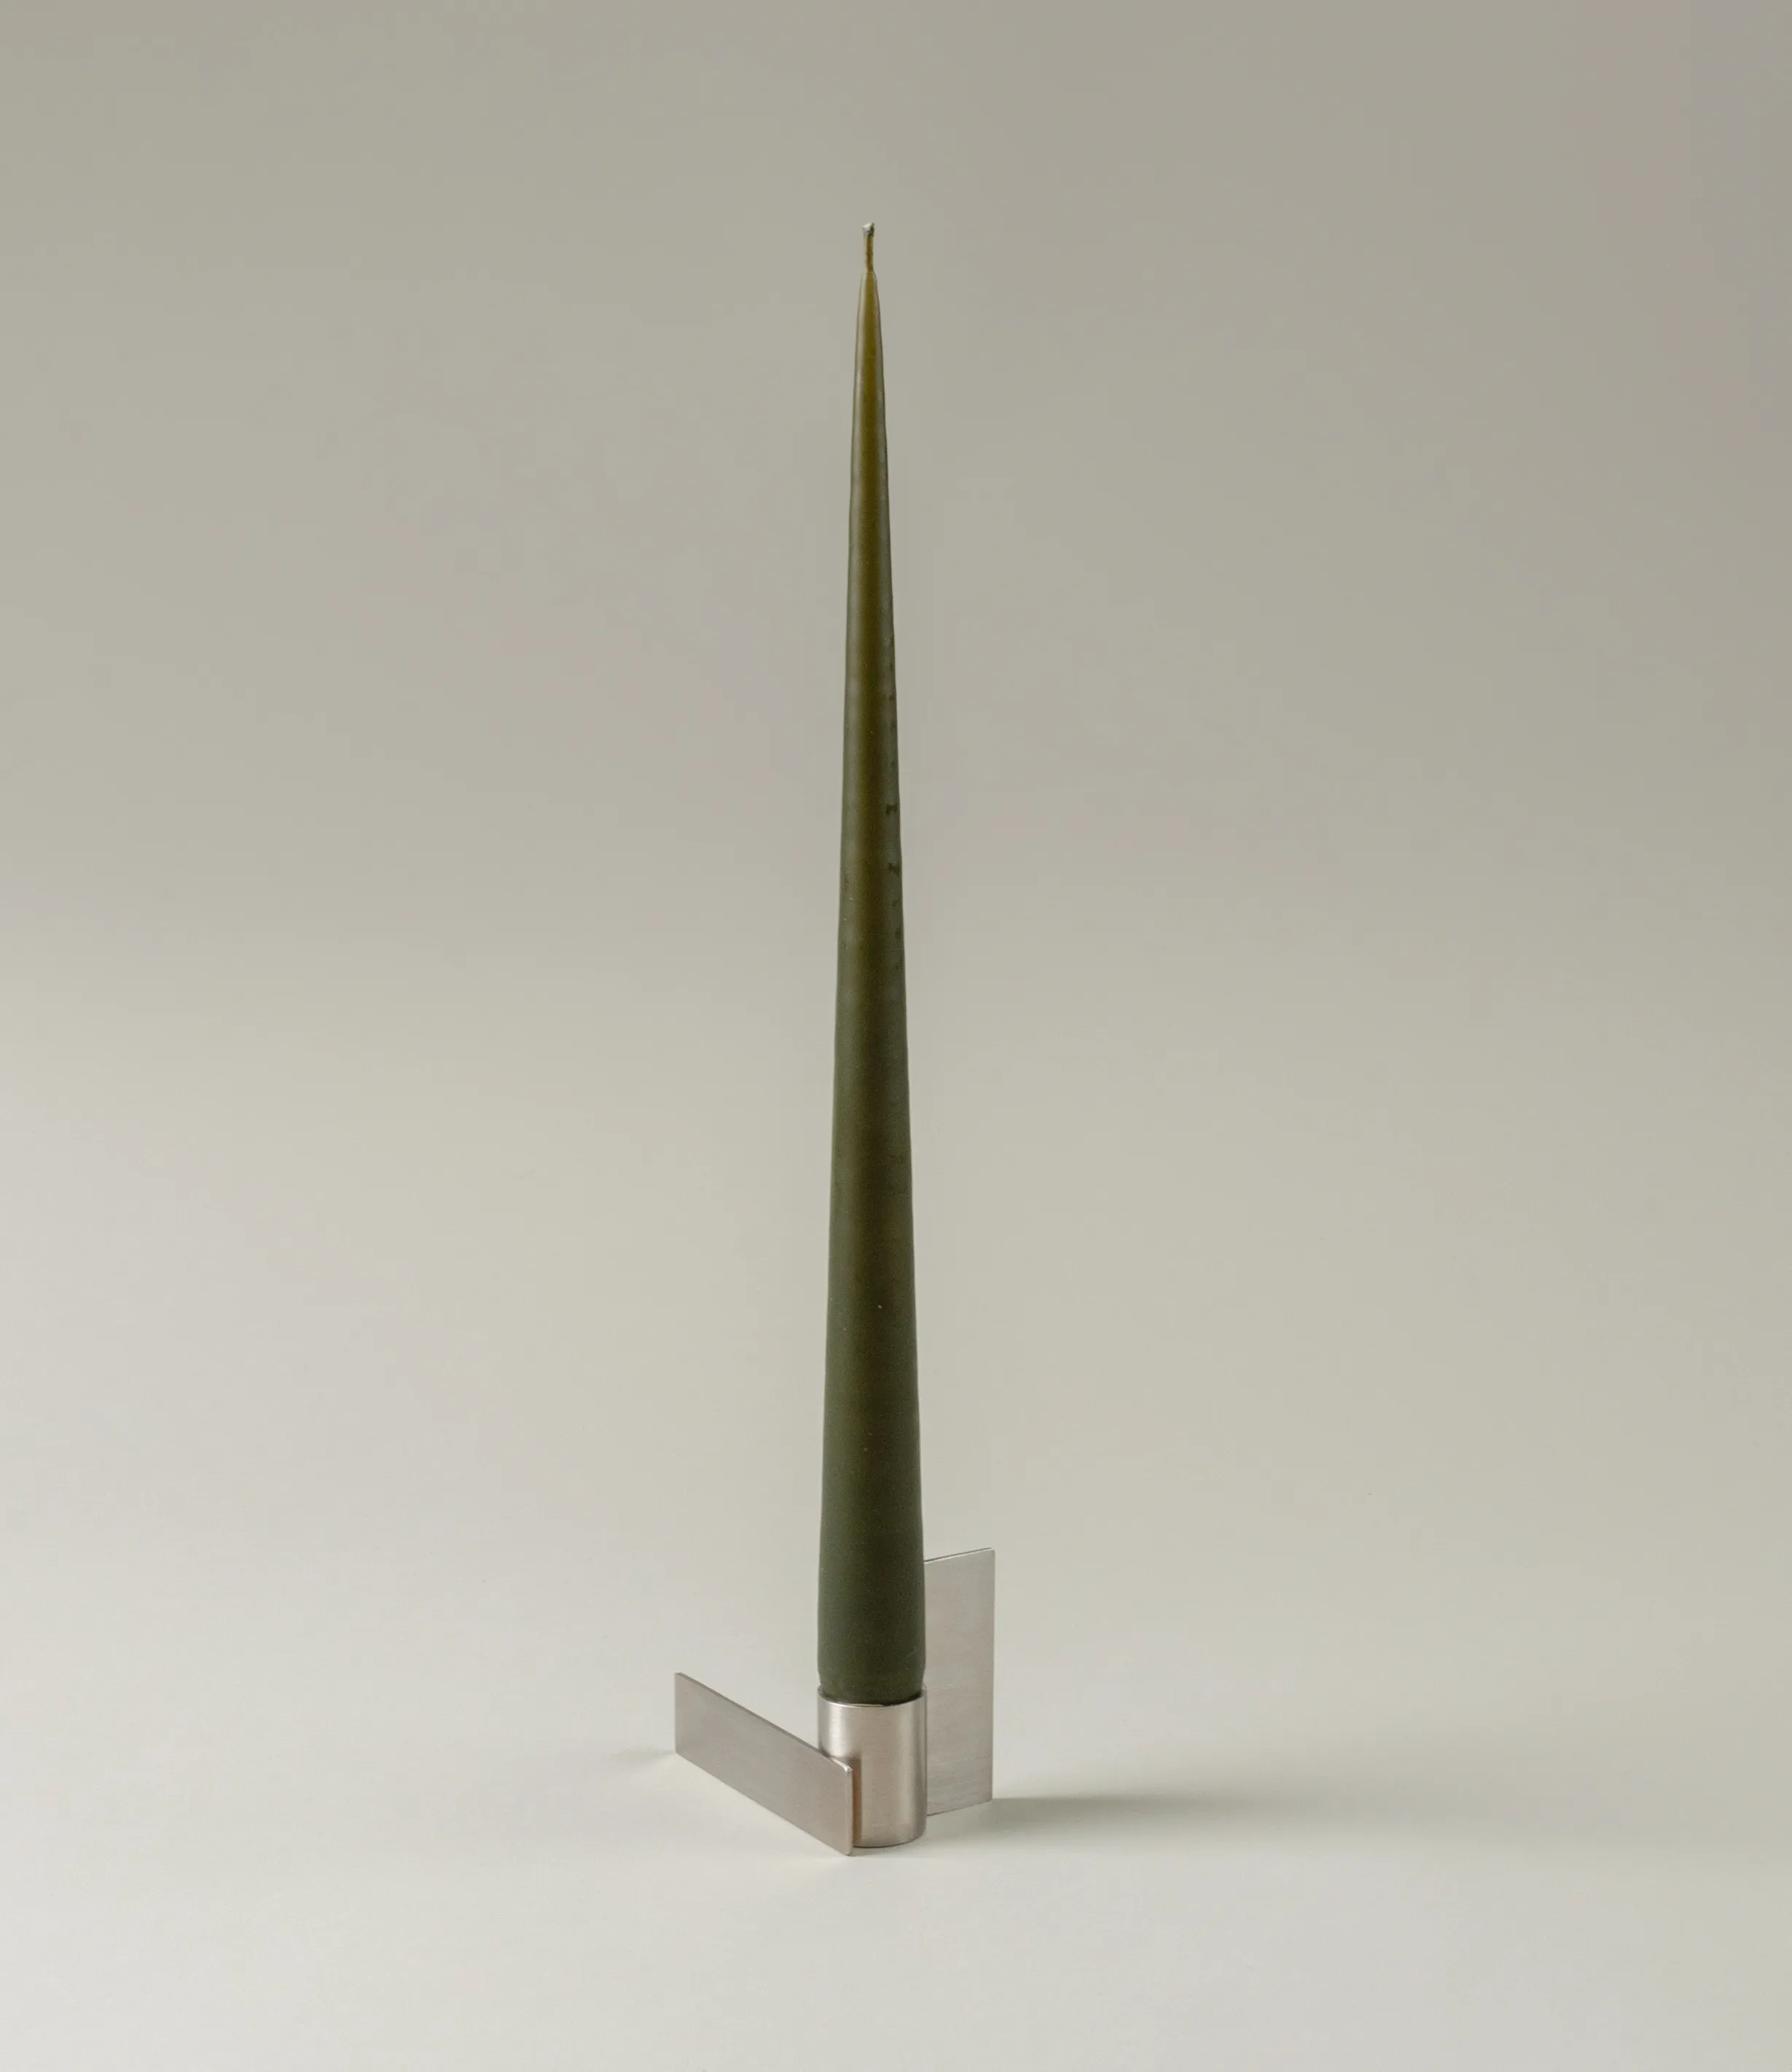 Ester&Erik's Taper Candle coming in the hue of Deep Forest. This dark warm green shade fits perfectly with the light stainless steel material of Icon Candleholder from Stences